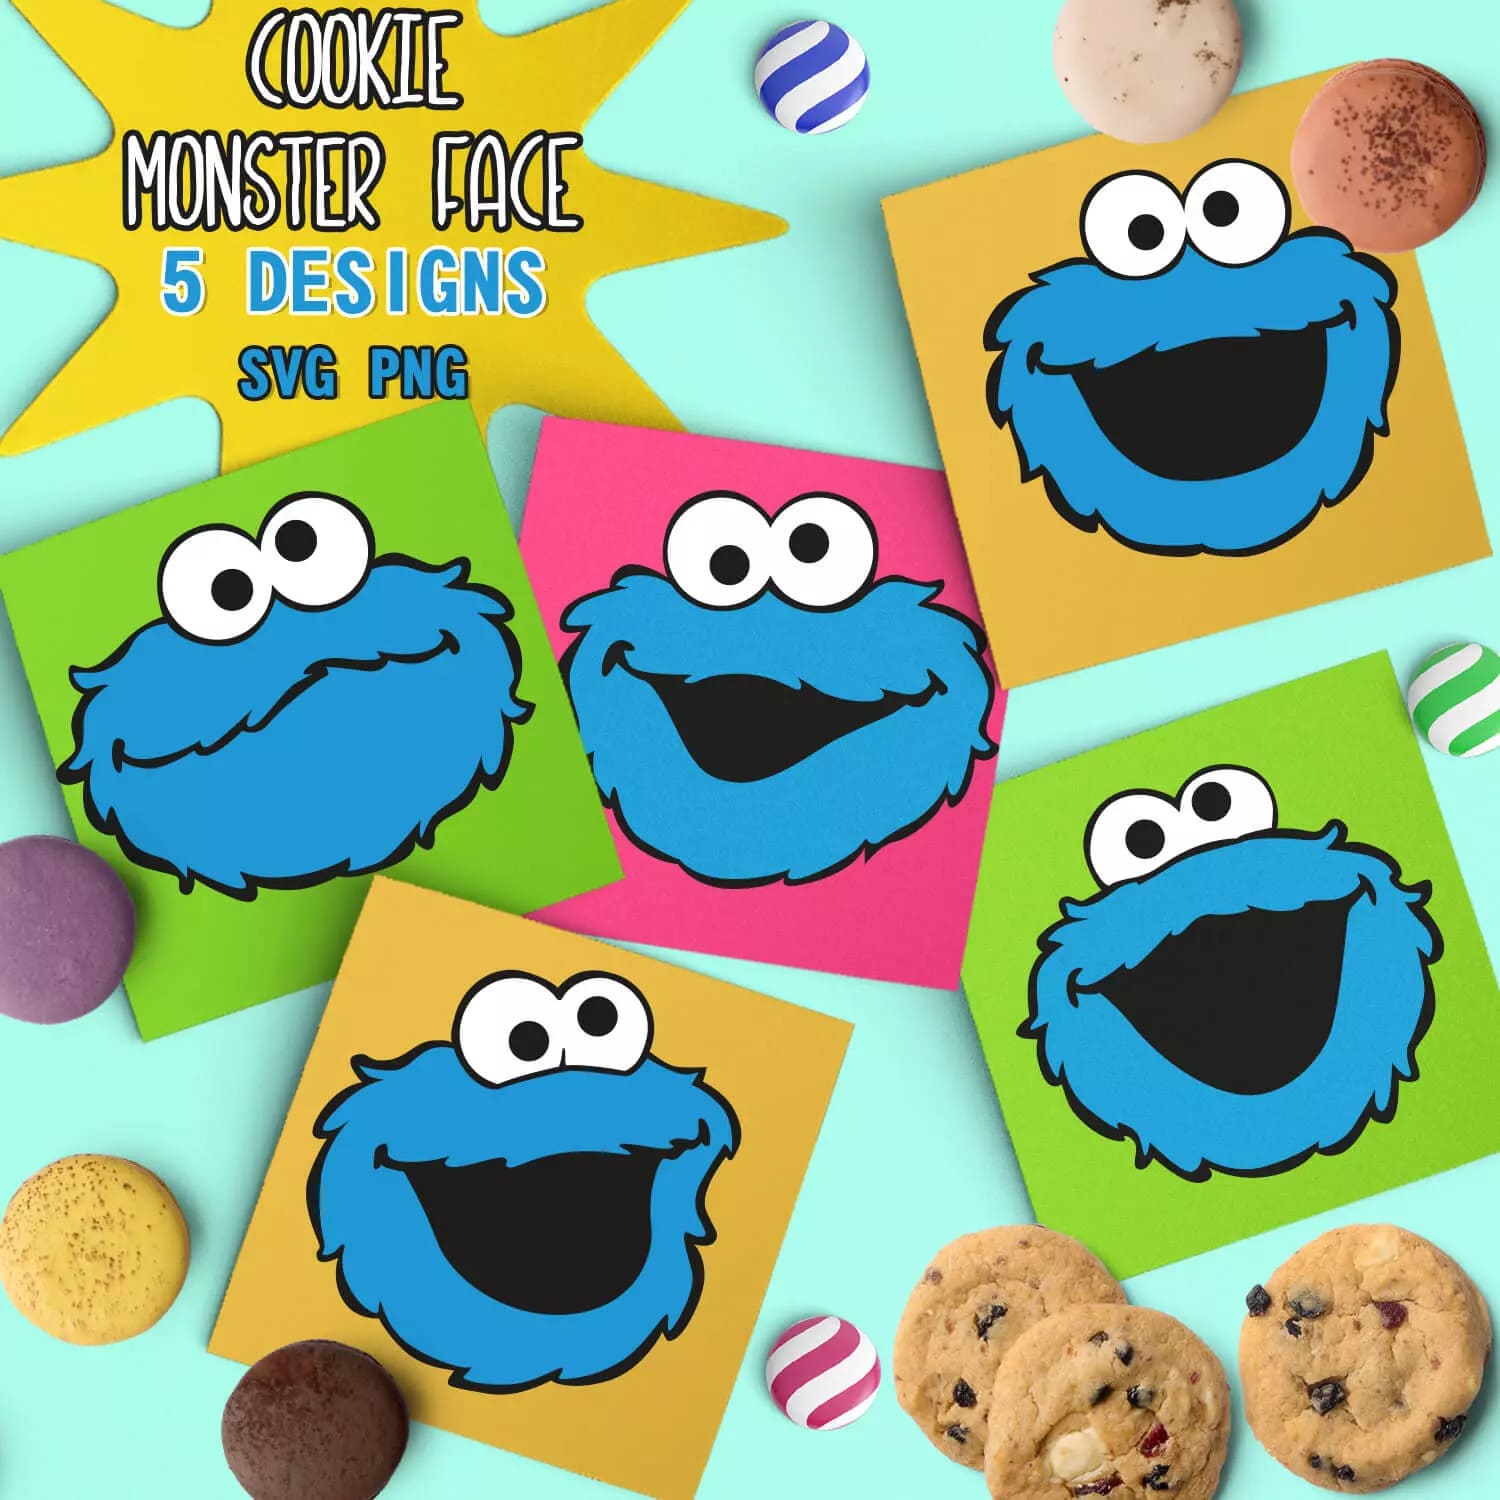 Cookie Monster Face SVG Preview 5.